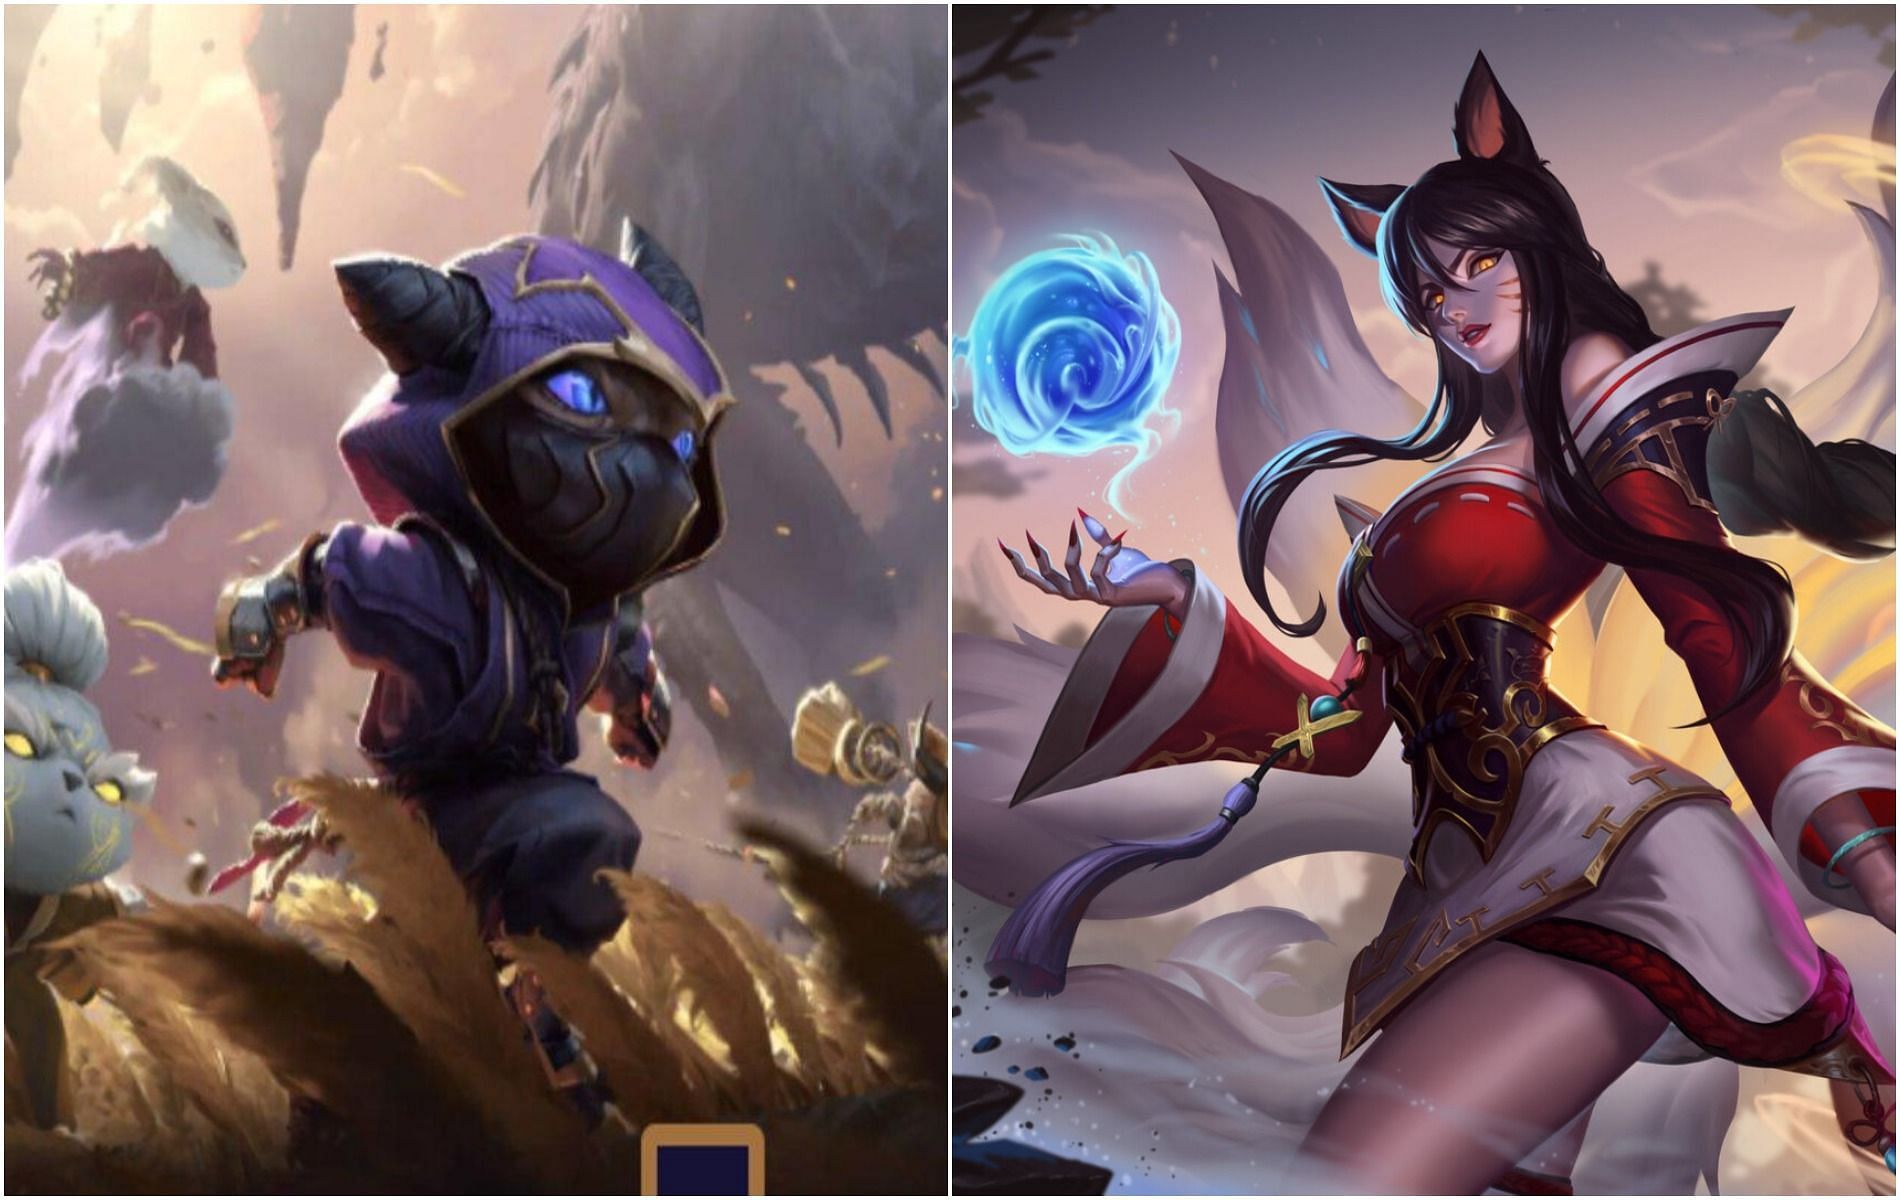 Ahri and Kennen are two of the four champions introduced to Legends of Runeterra in patch 2.21.0. (Image via Sportskeeda)